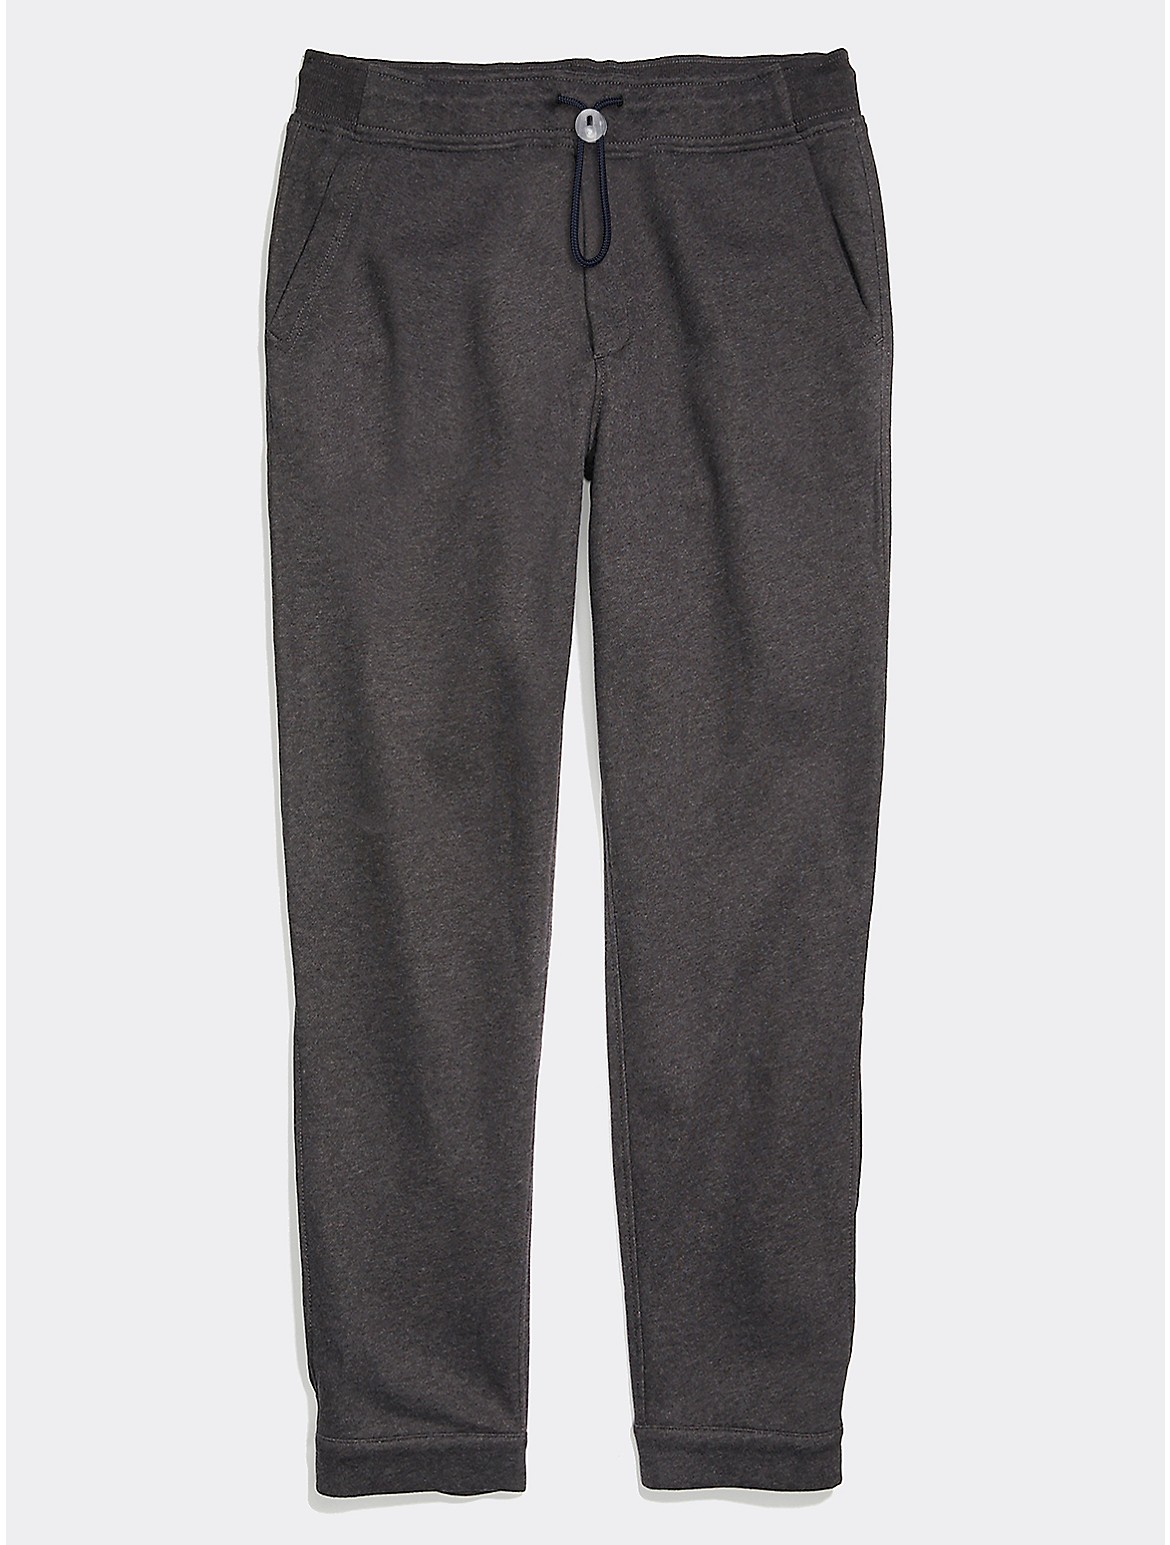 Tommy Hilfiger Classic Sweatpants In Charcoal Grey Heather